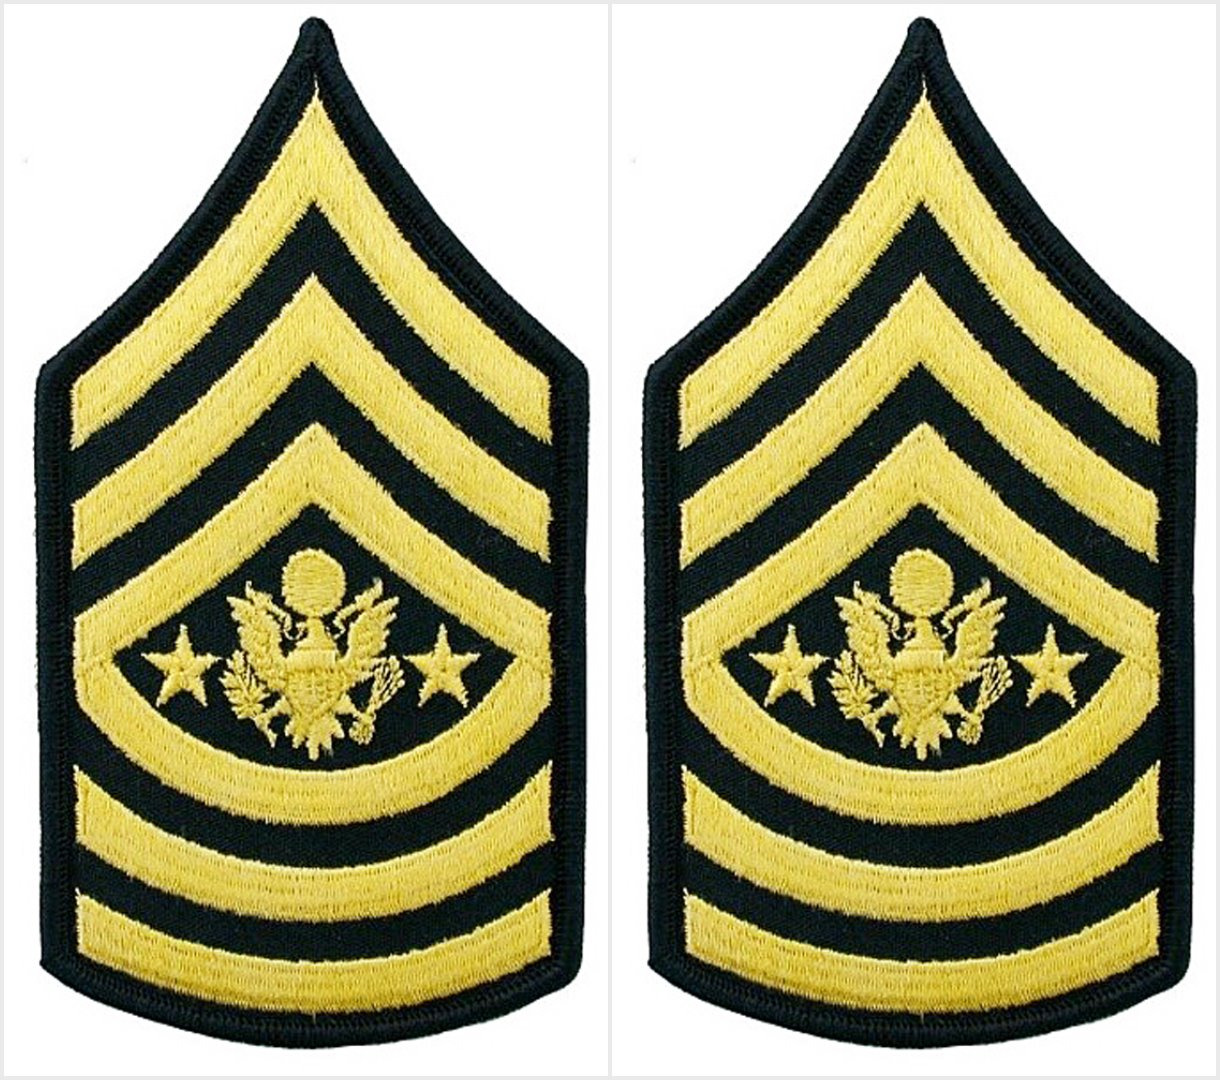 Army Sergeant Major of the Army E-9 Blue Rank Chevron Patches Pair - Female